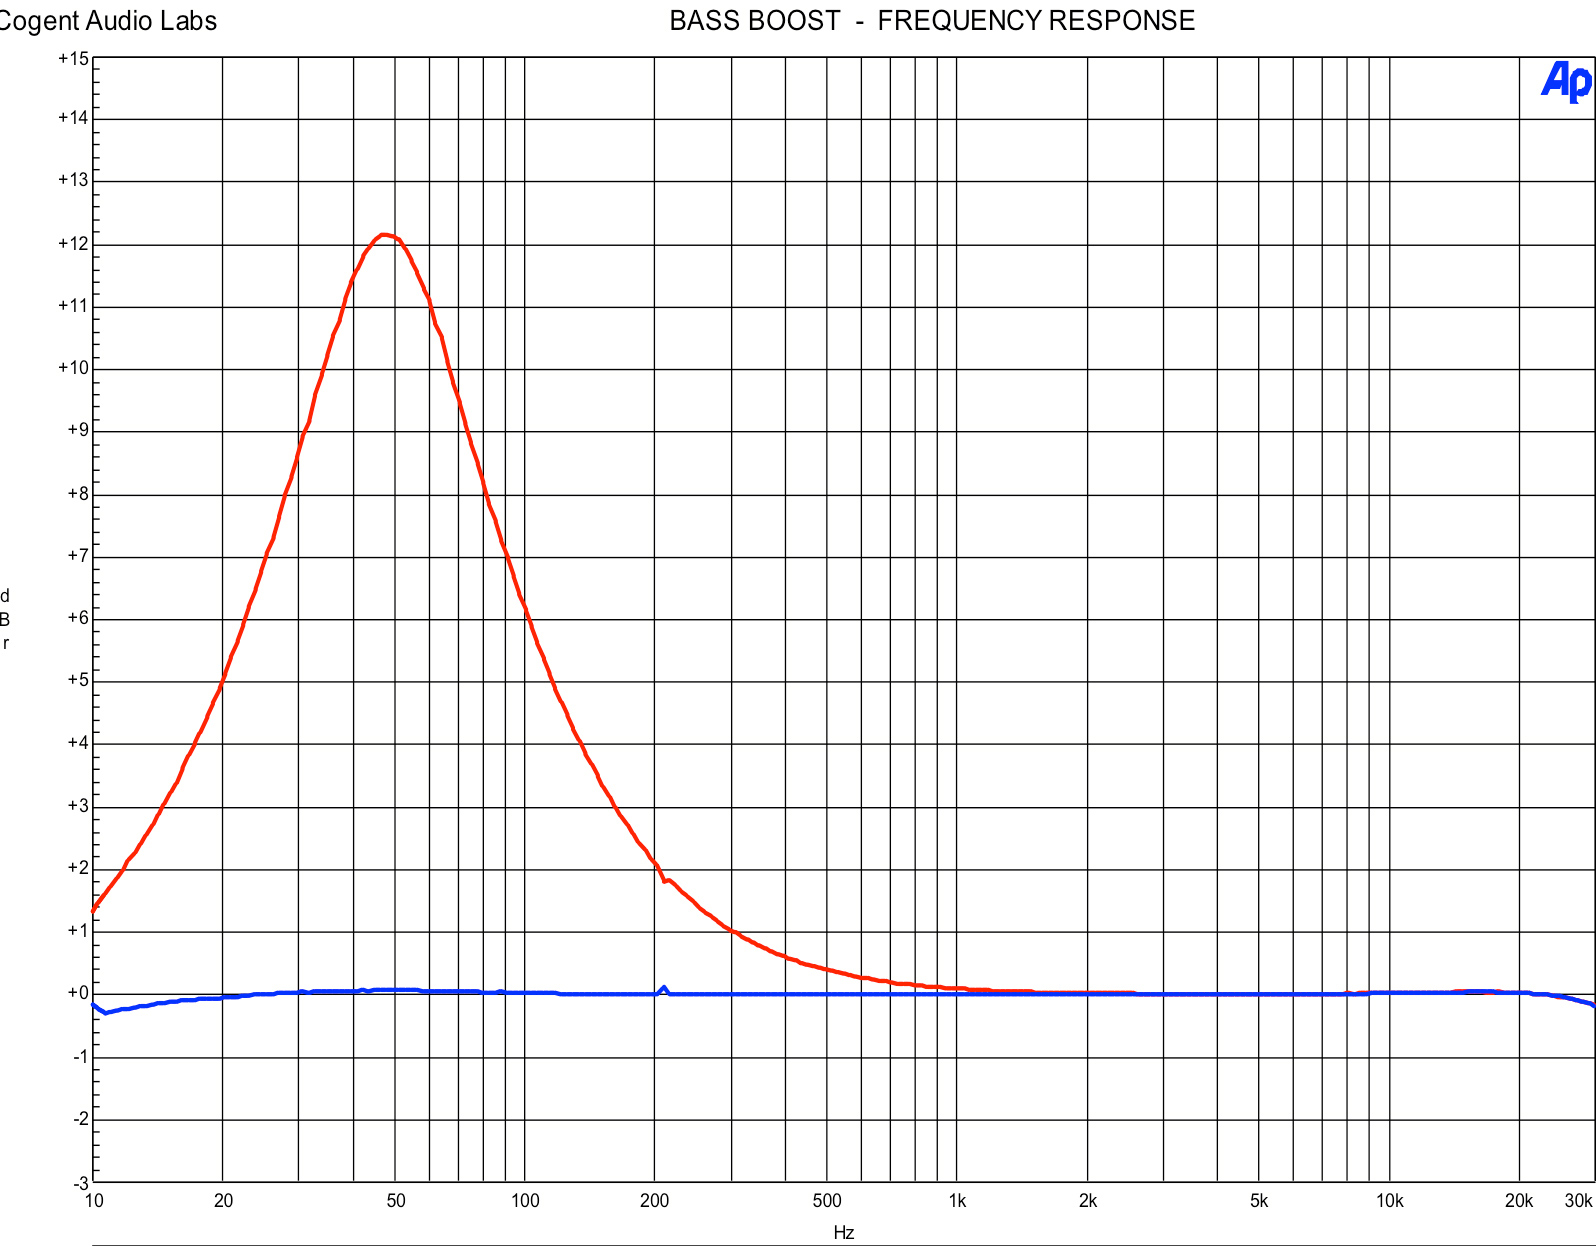 Bass Boost - Frequency Response